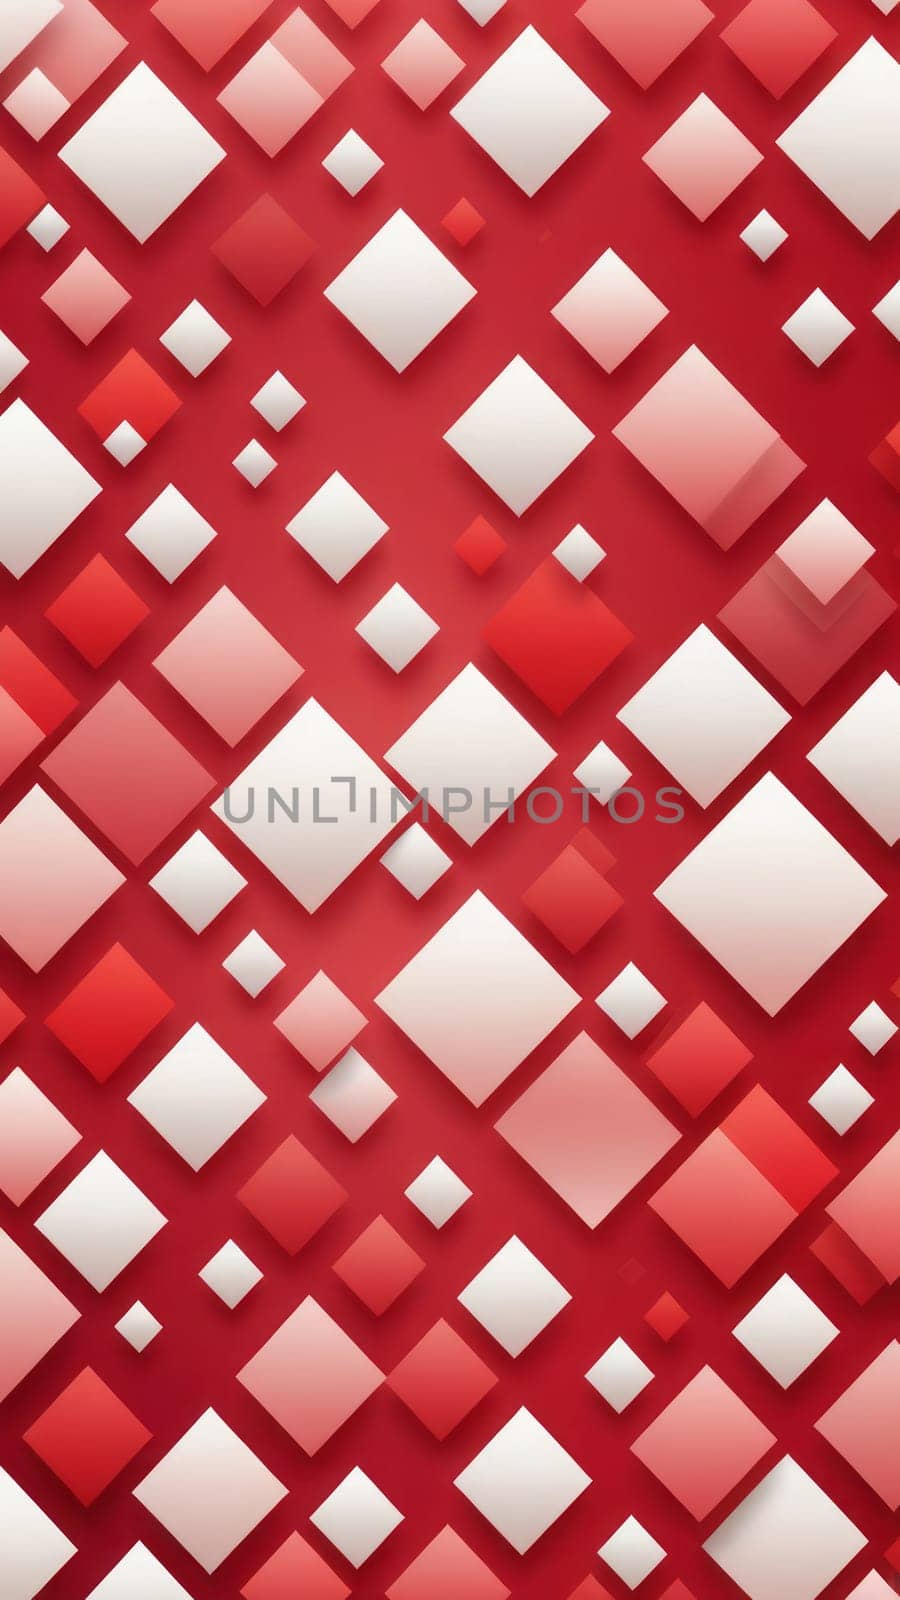 Screen background from Diamond shapes and red by nkotlyar